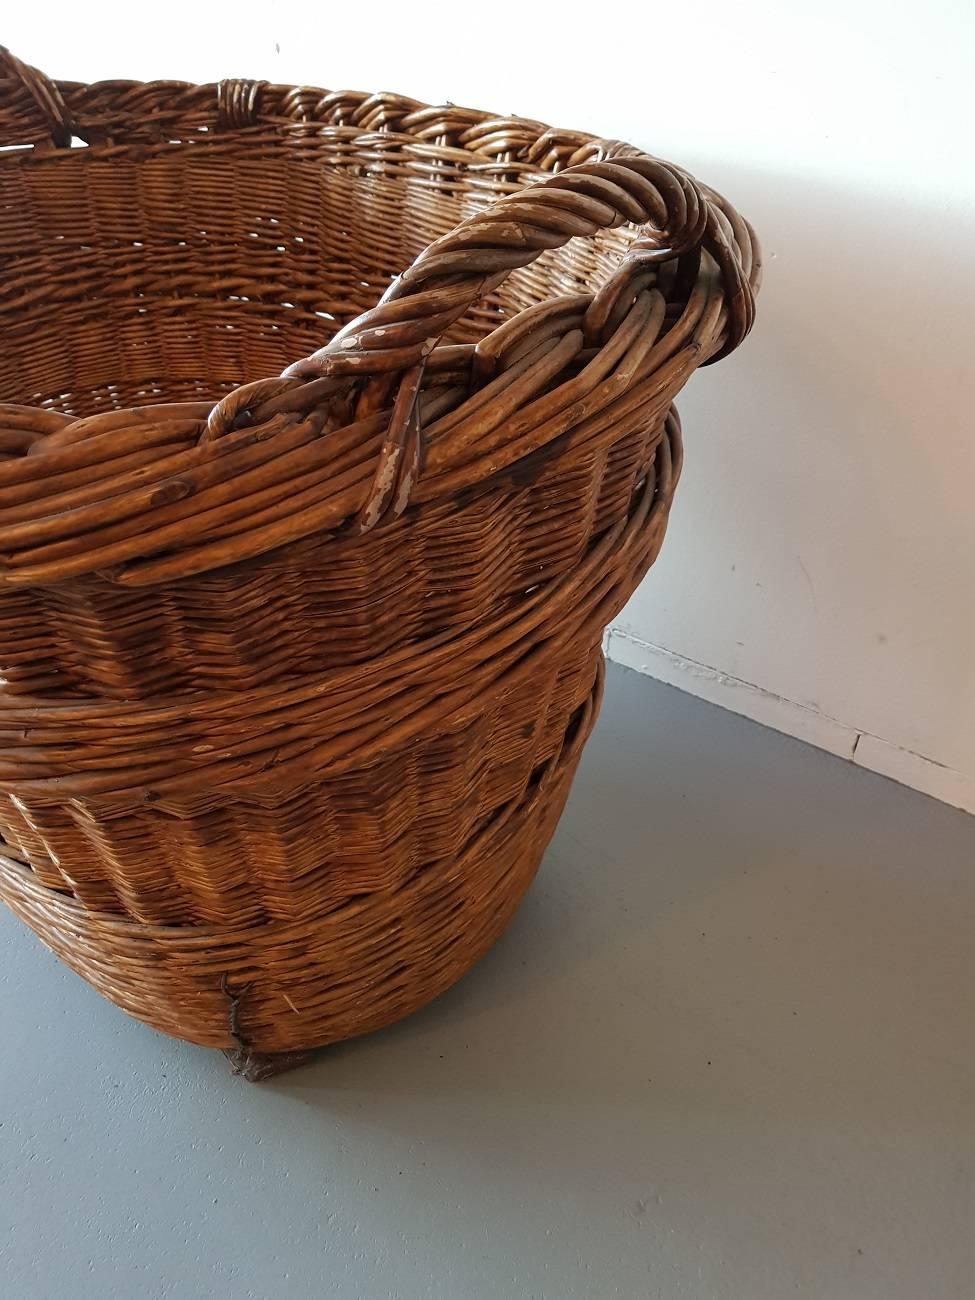 Vintage French Handcrafted Wicker Grape Basket from the Champagne Region 1